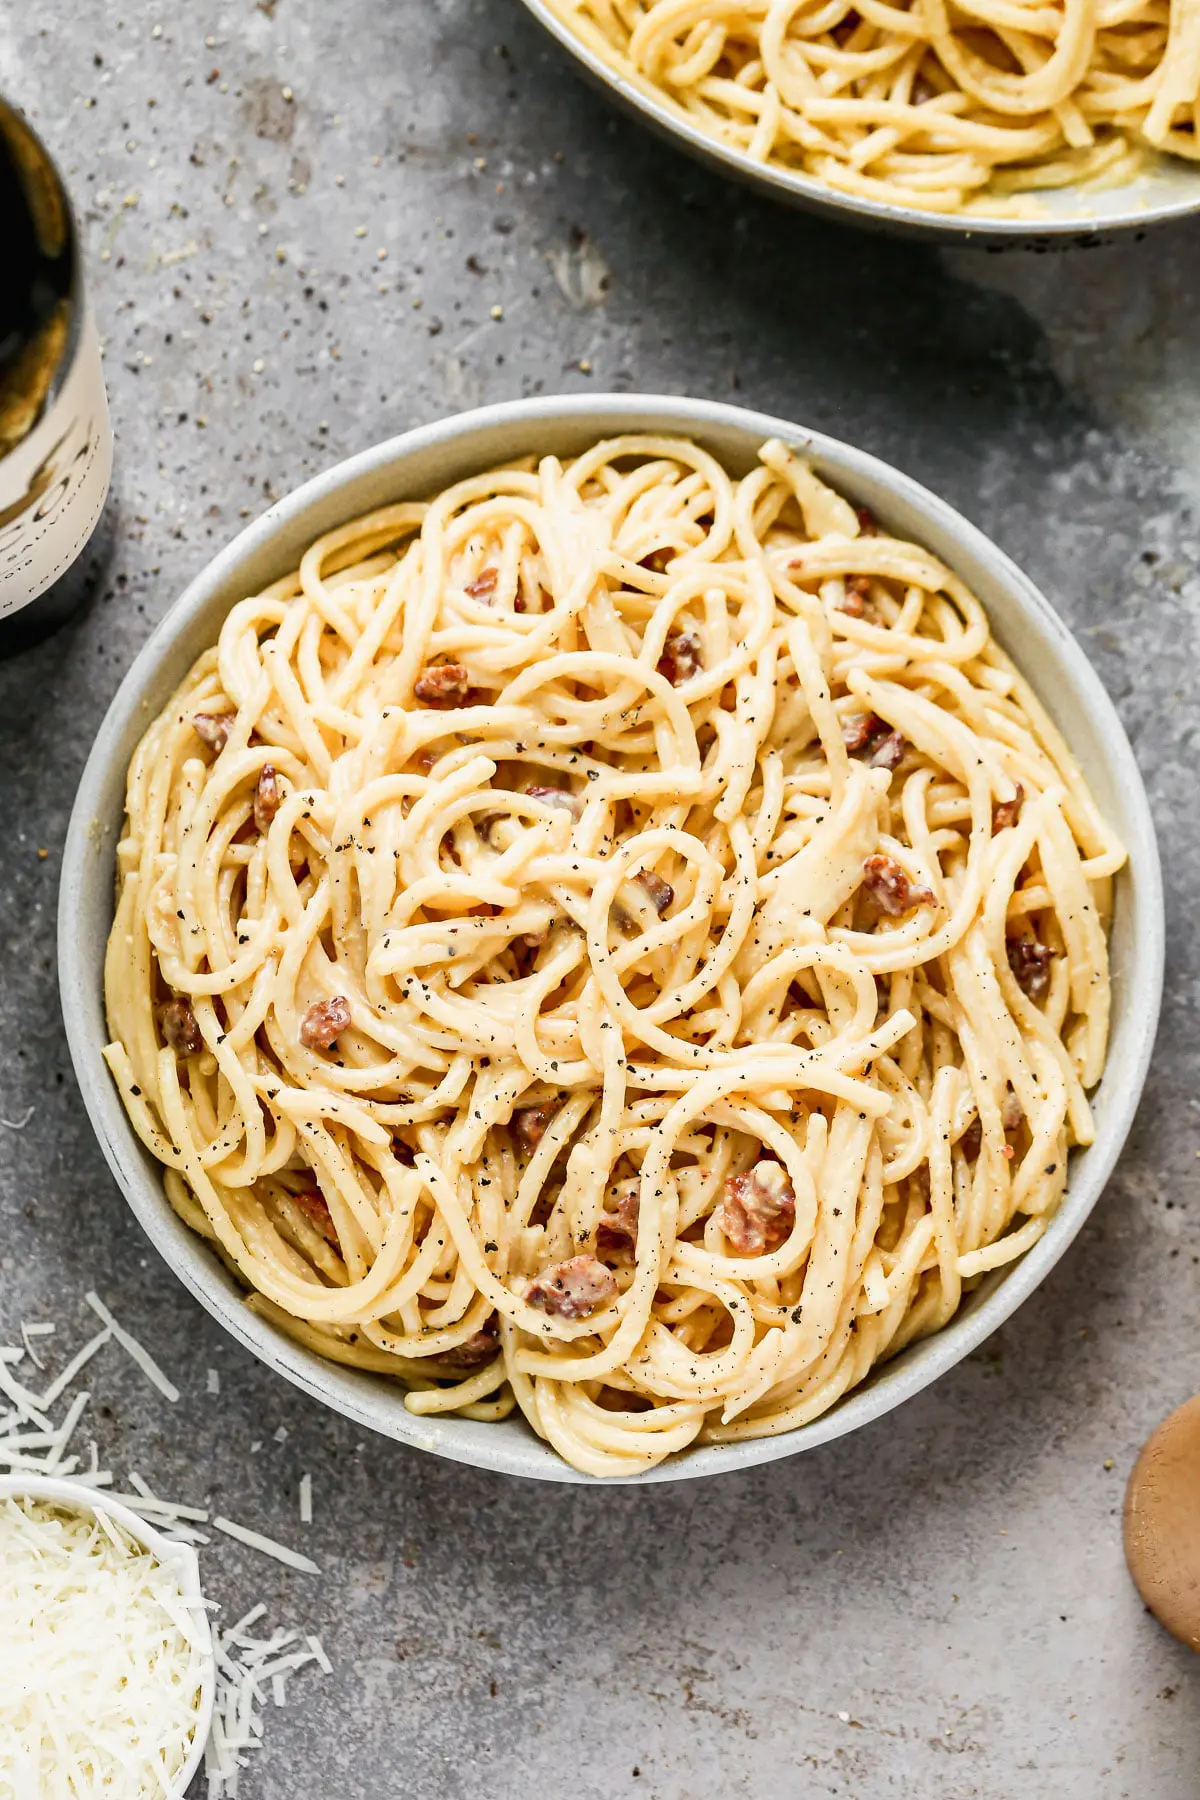 Silky-smooth noodles twirled in a rich, creamy (but cream-less) sauce, nutty pecorino cheese, and bits of salty bacon, our Bucatini Carbonara is the ultimate in Italian comfort food and arguably, the simplest. &nbsp;Our version amps up the amount of both cheese and bacon, adds in a little bit of garlic, and swaps out classic spaghetti for thick bucatini noodles.